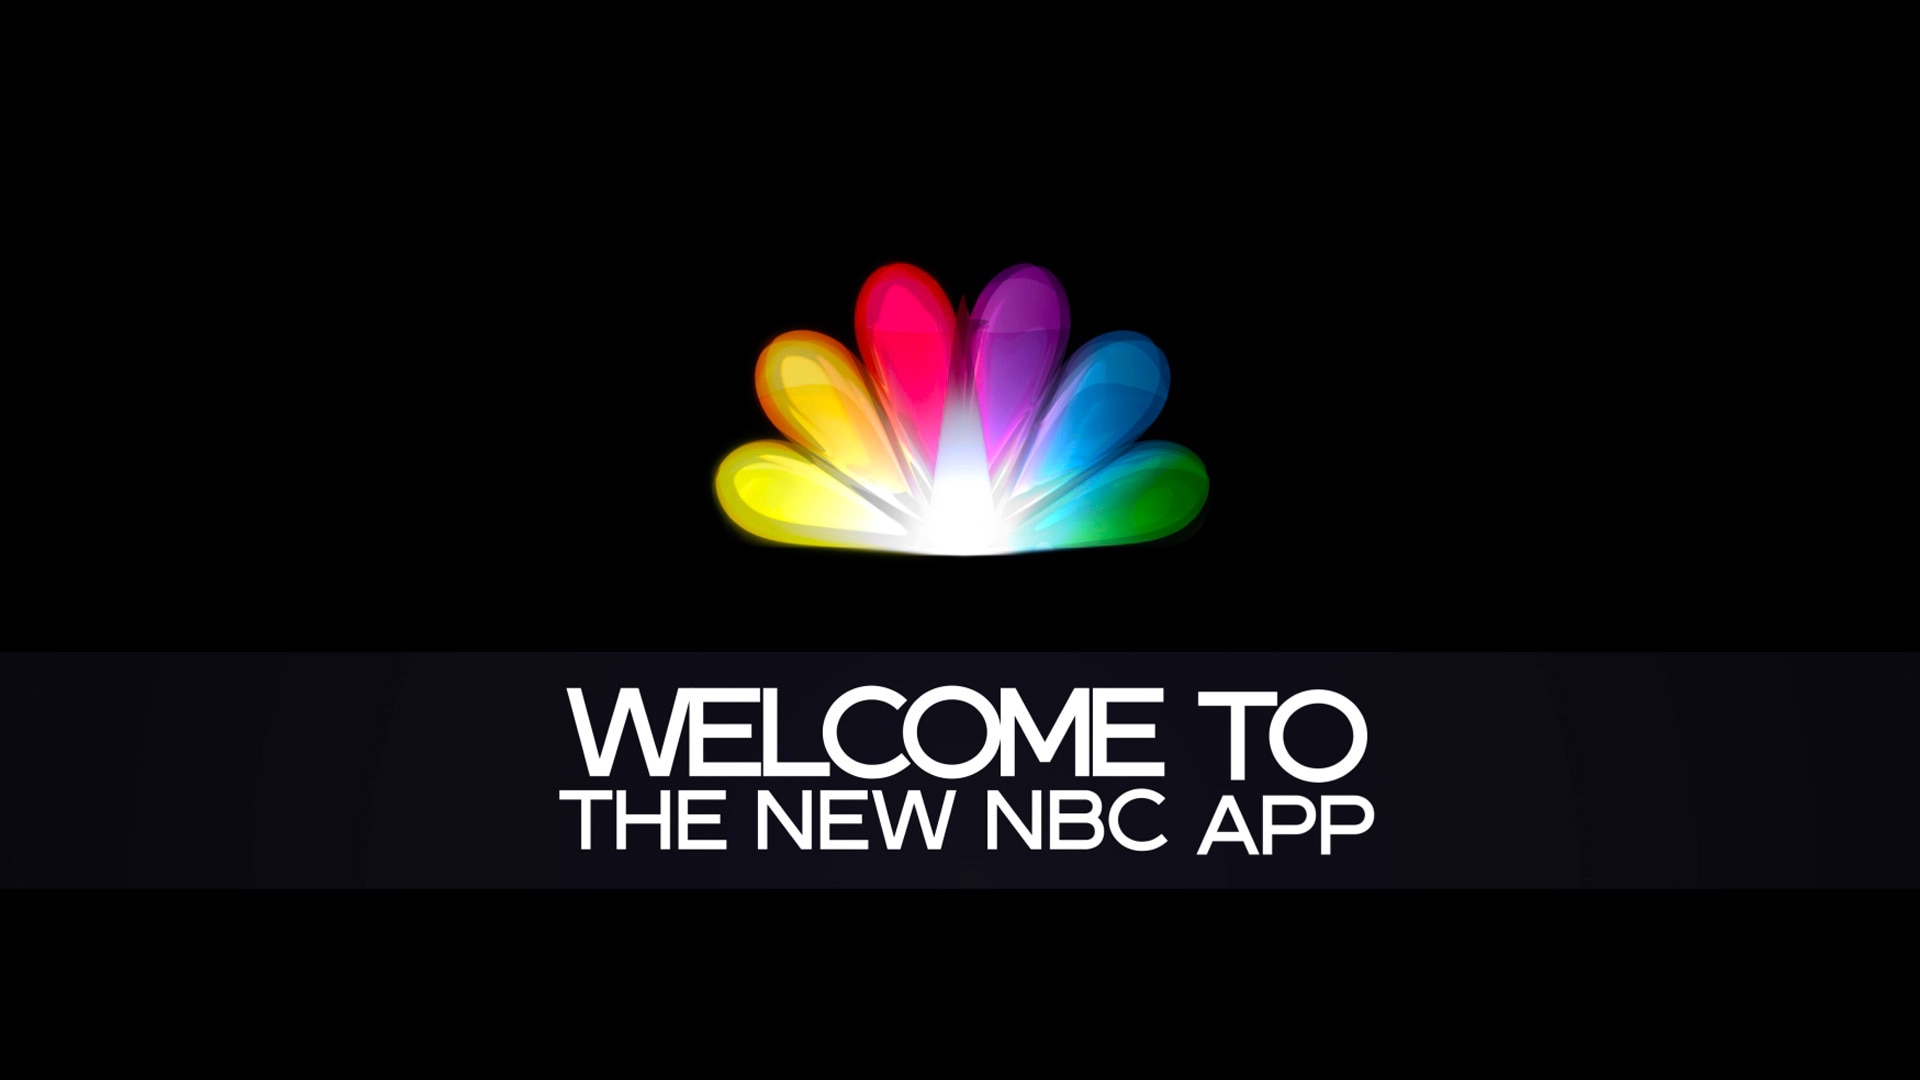 how do you get credits on nbc app